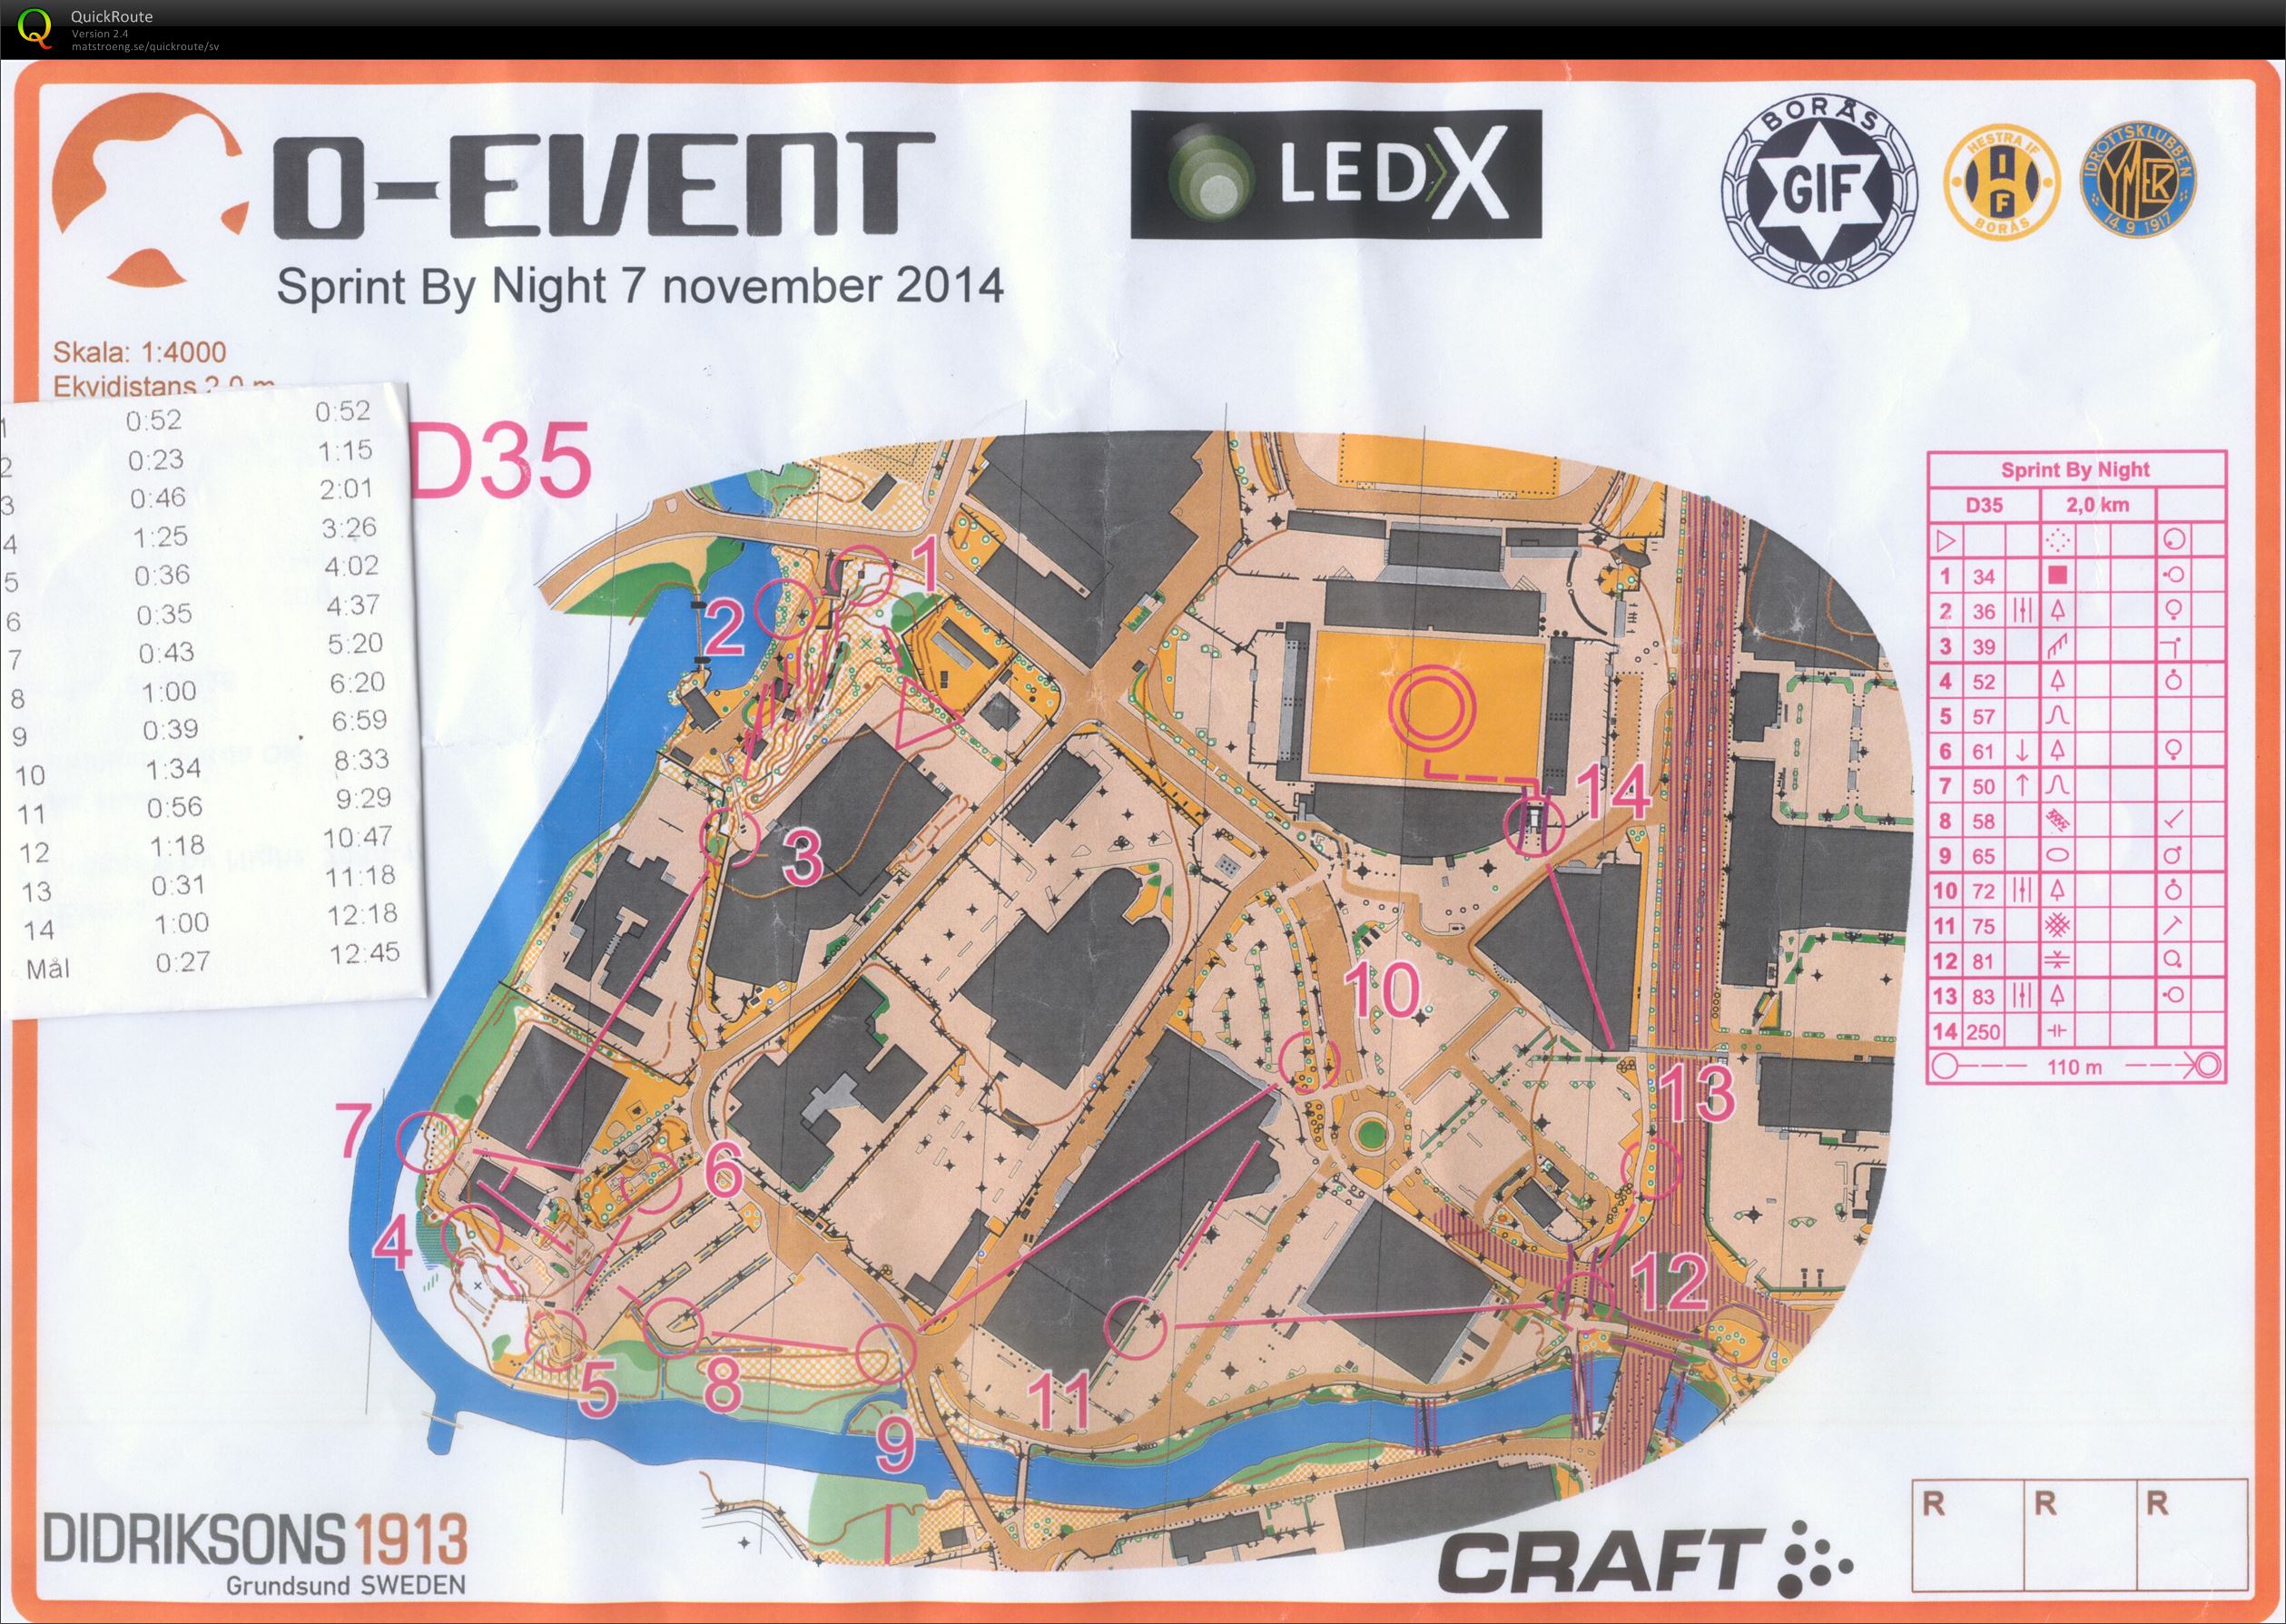 O-event Sprint by Night (D35) (07-11-2014)